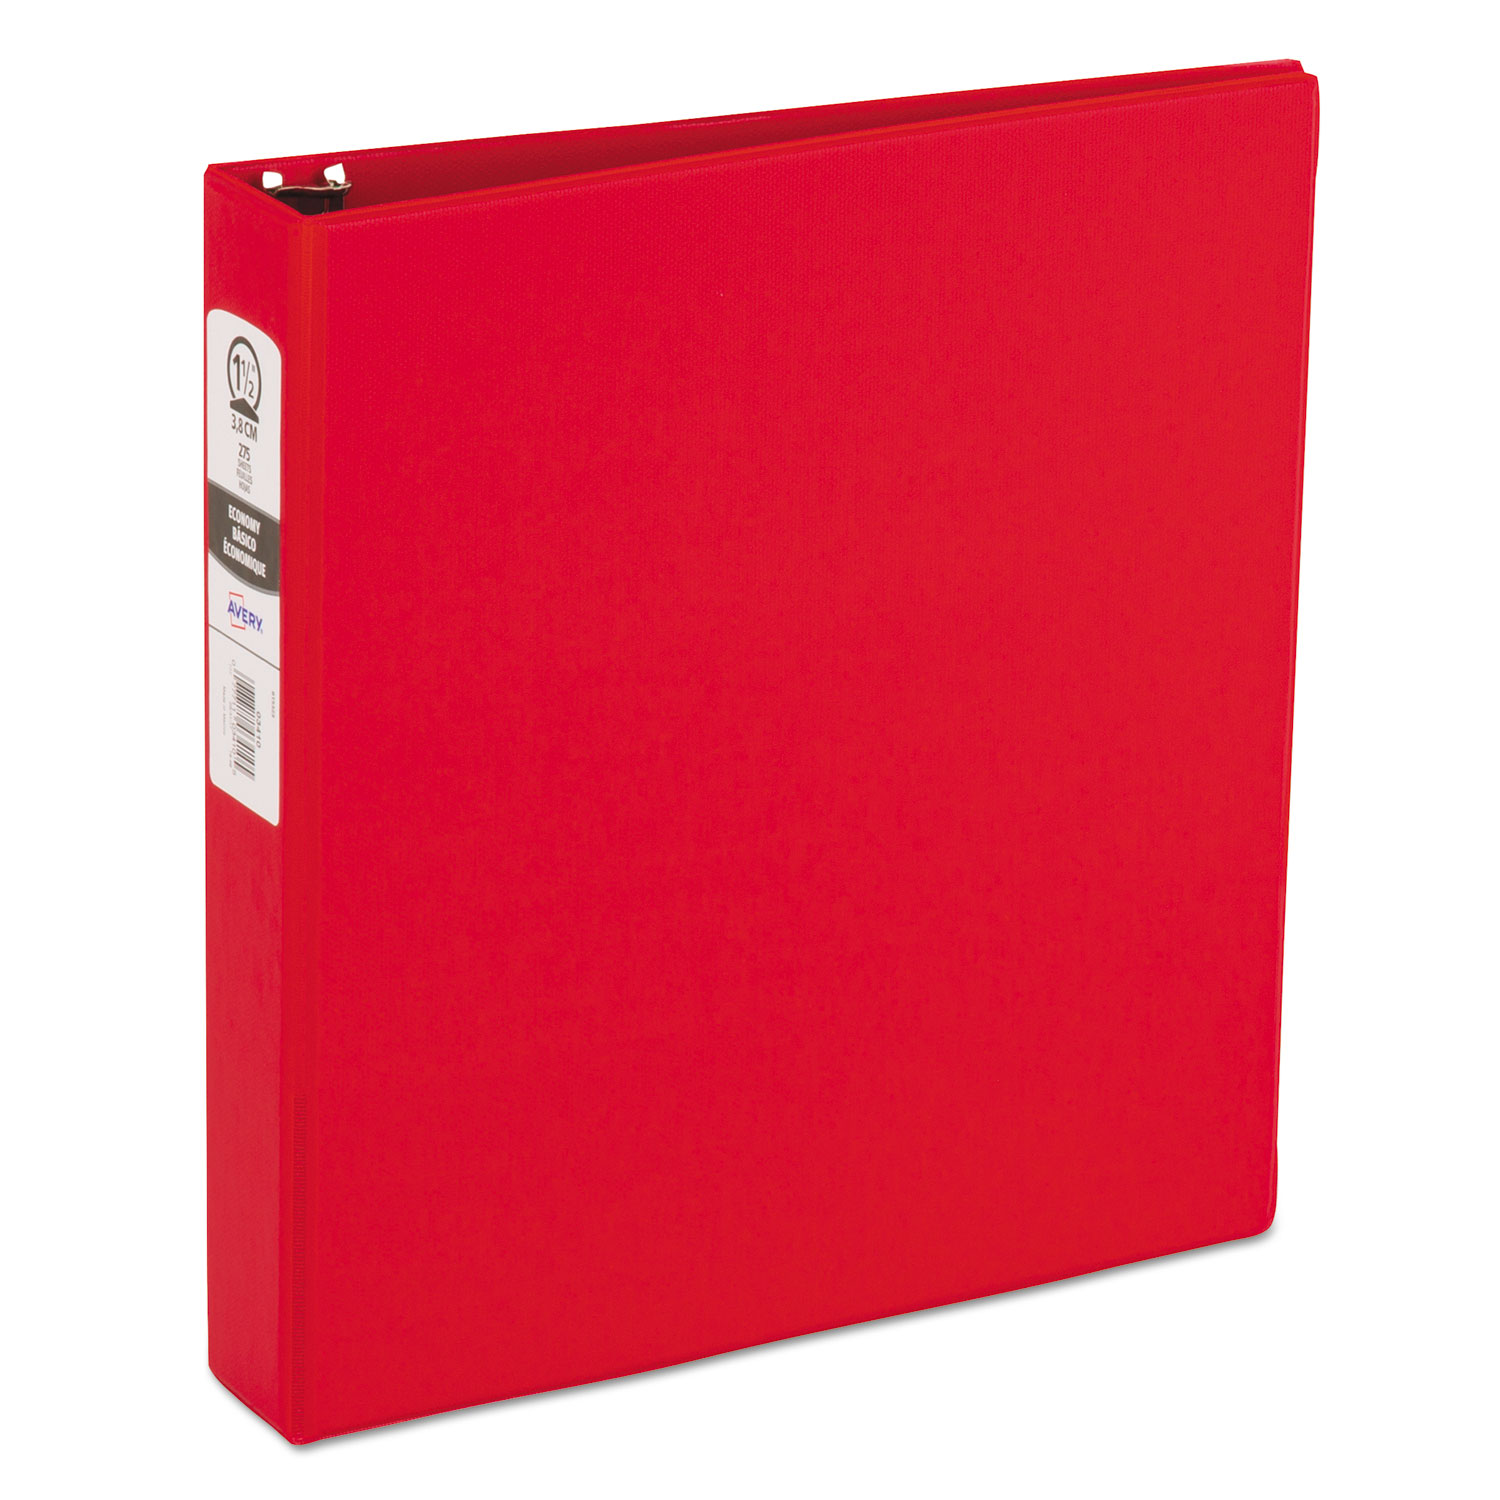  Avery 03410 Economy Non-View Binder with Round Rings, 3 Rings, 1.5 Capacity, 11 x 8.5, Red (AVE03410) 